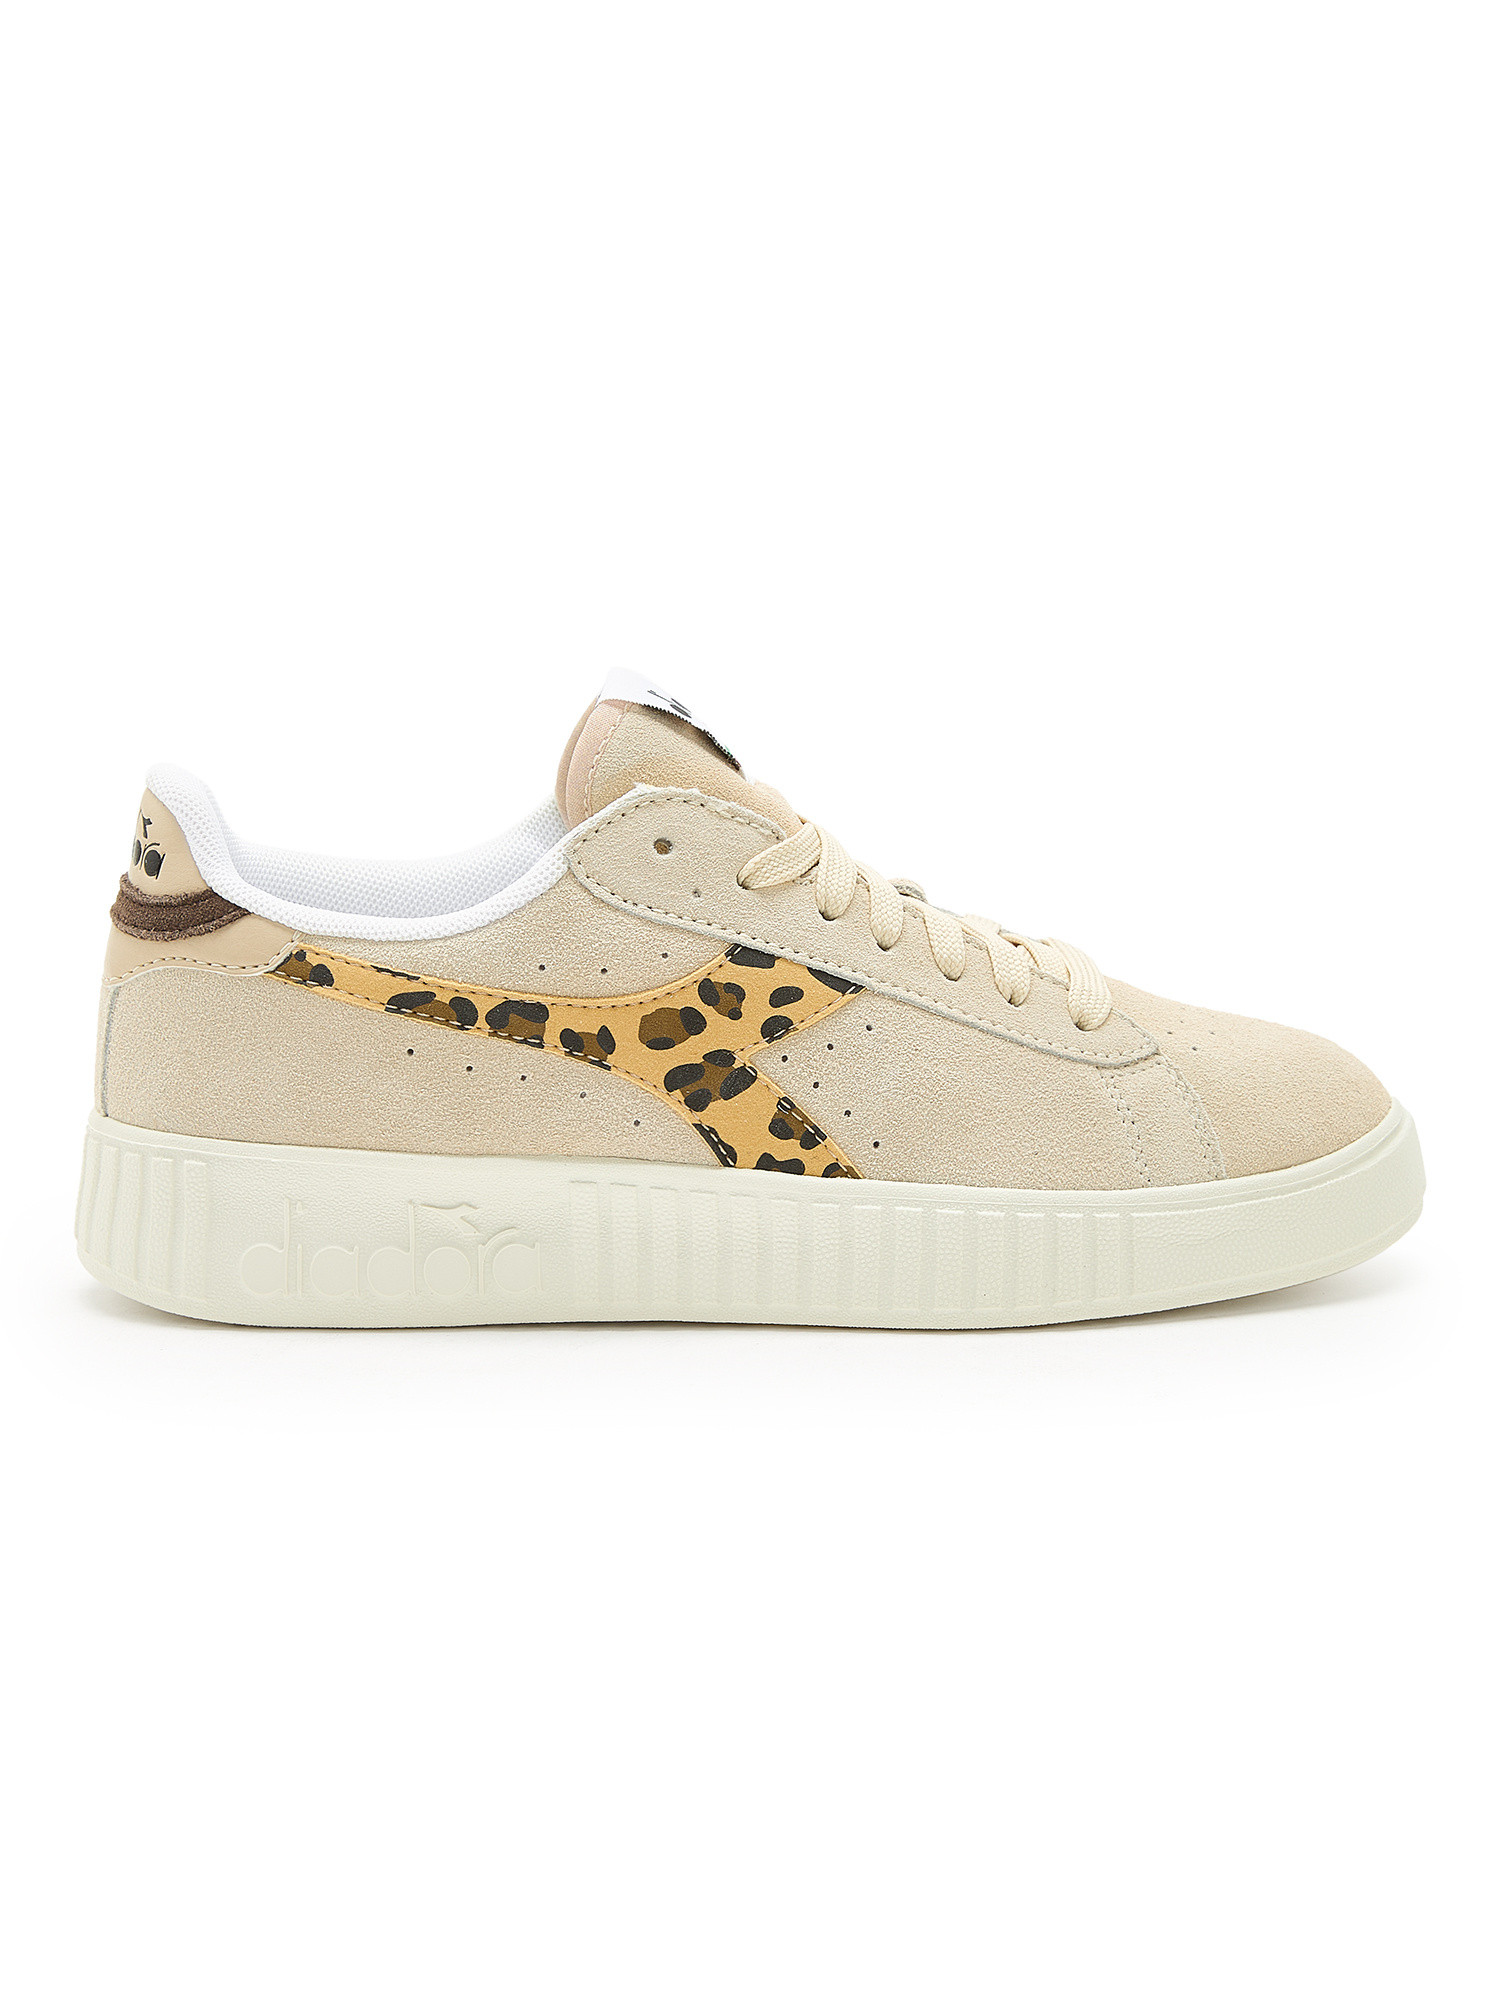 Diadora - Game Step Suede Animalier Shoes, White, large image number 0